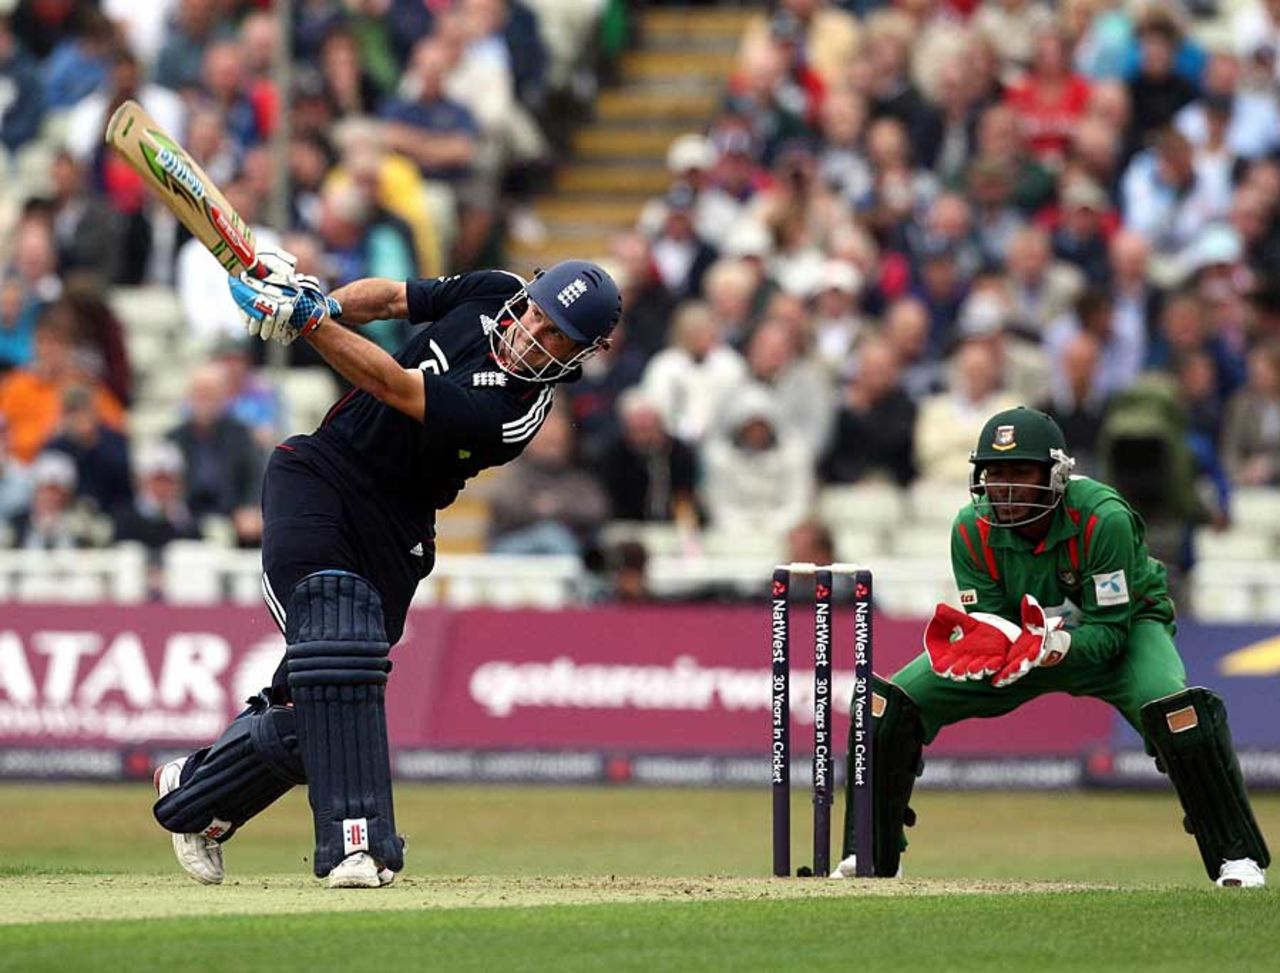 Andrew Strauss used his feet well against the spinners, England v Bangladesh, 3rd ODI, Edgbaston, July 12, 2010